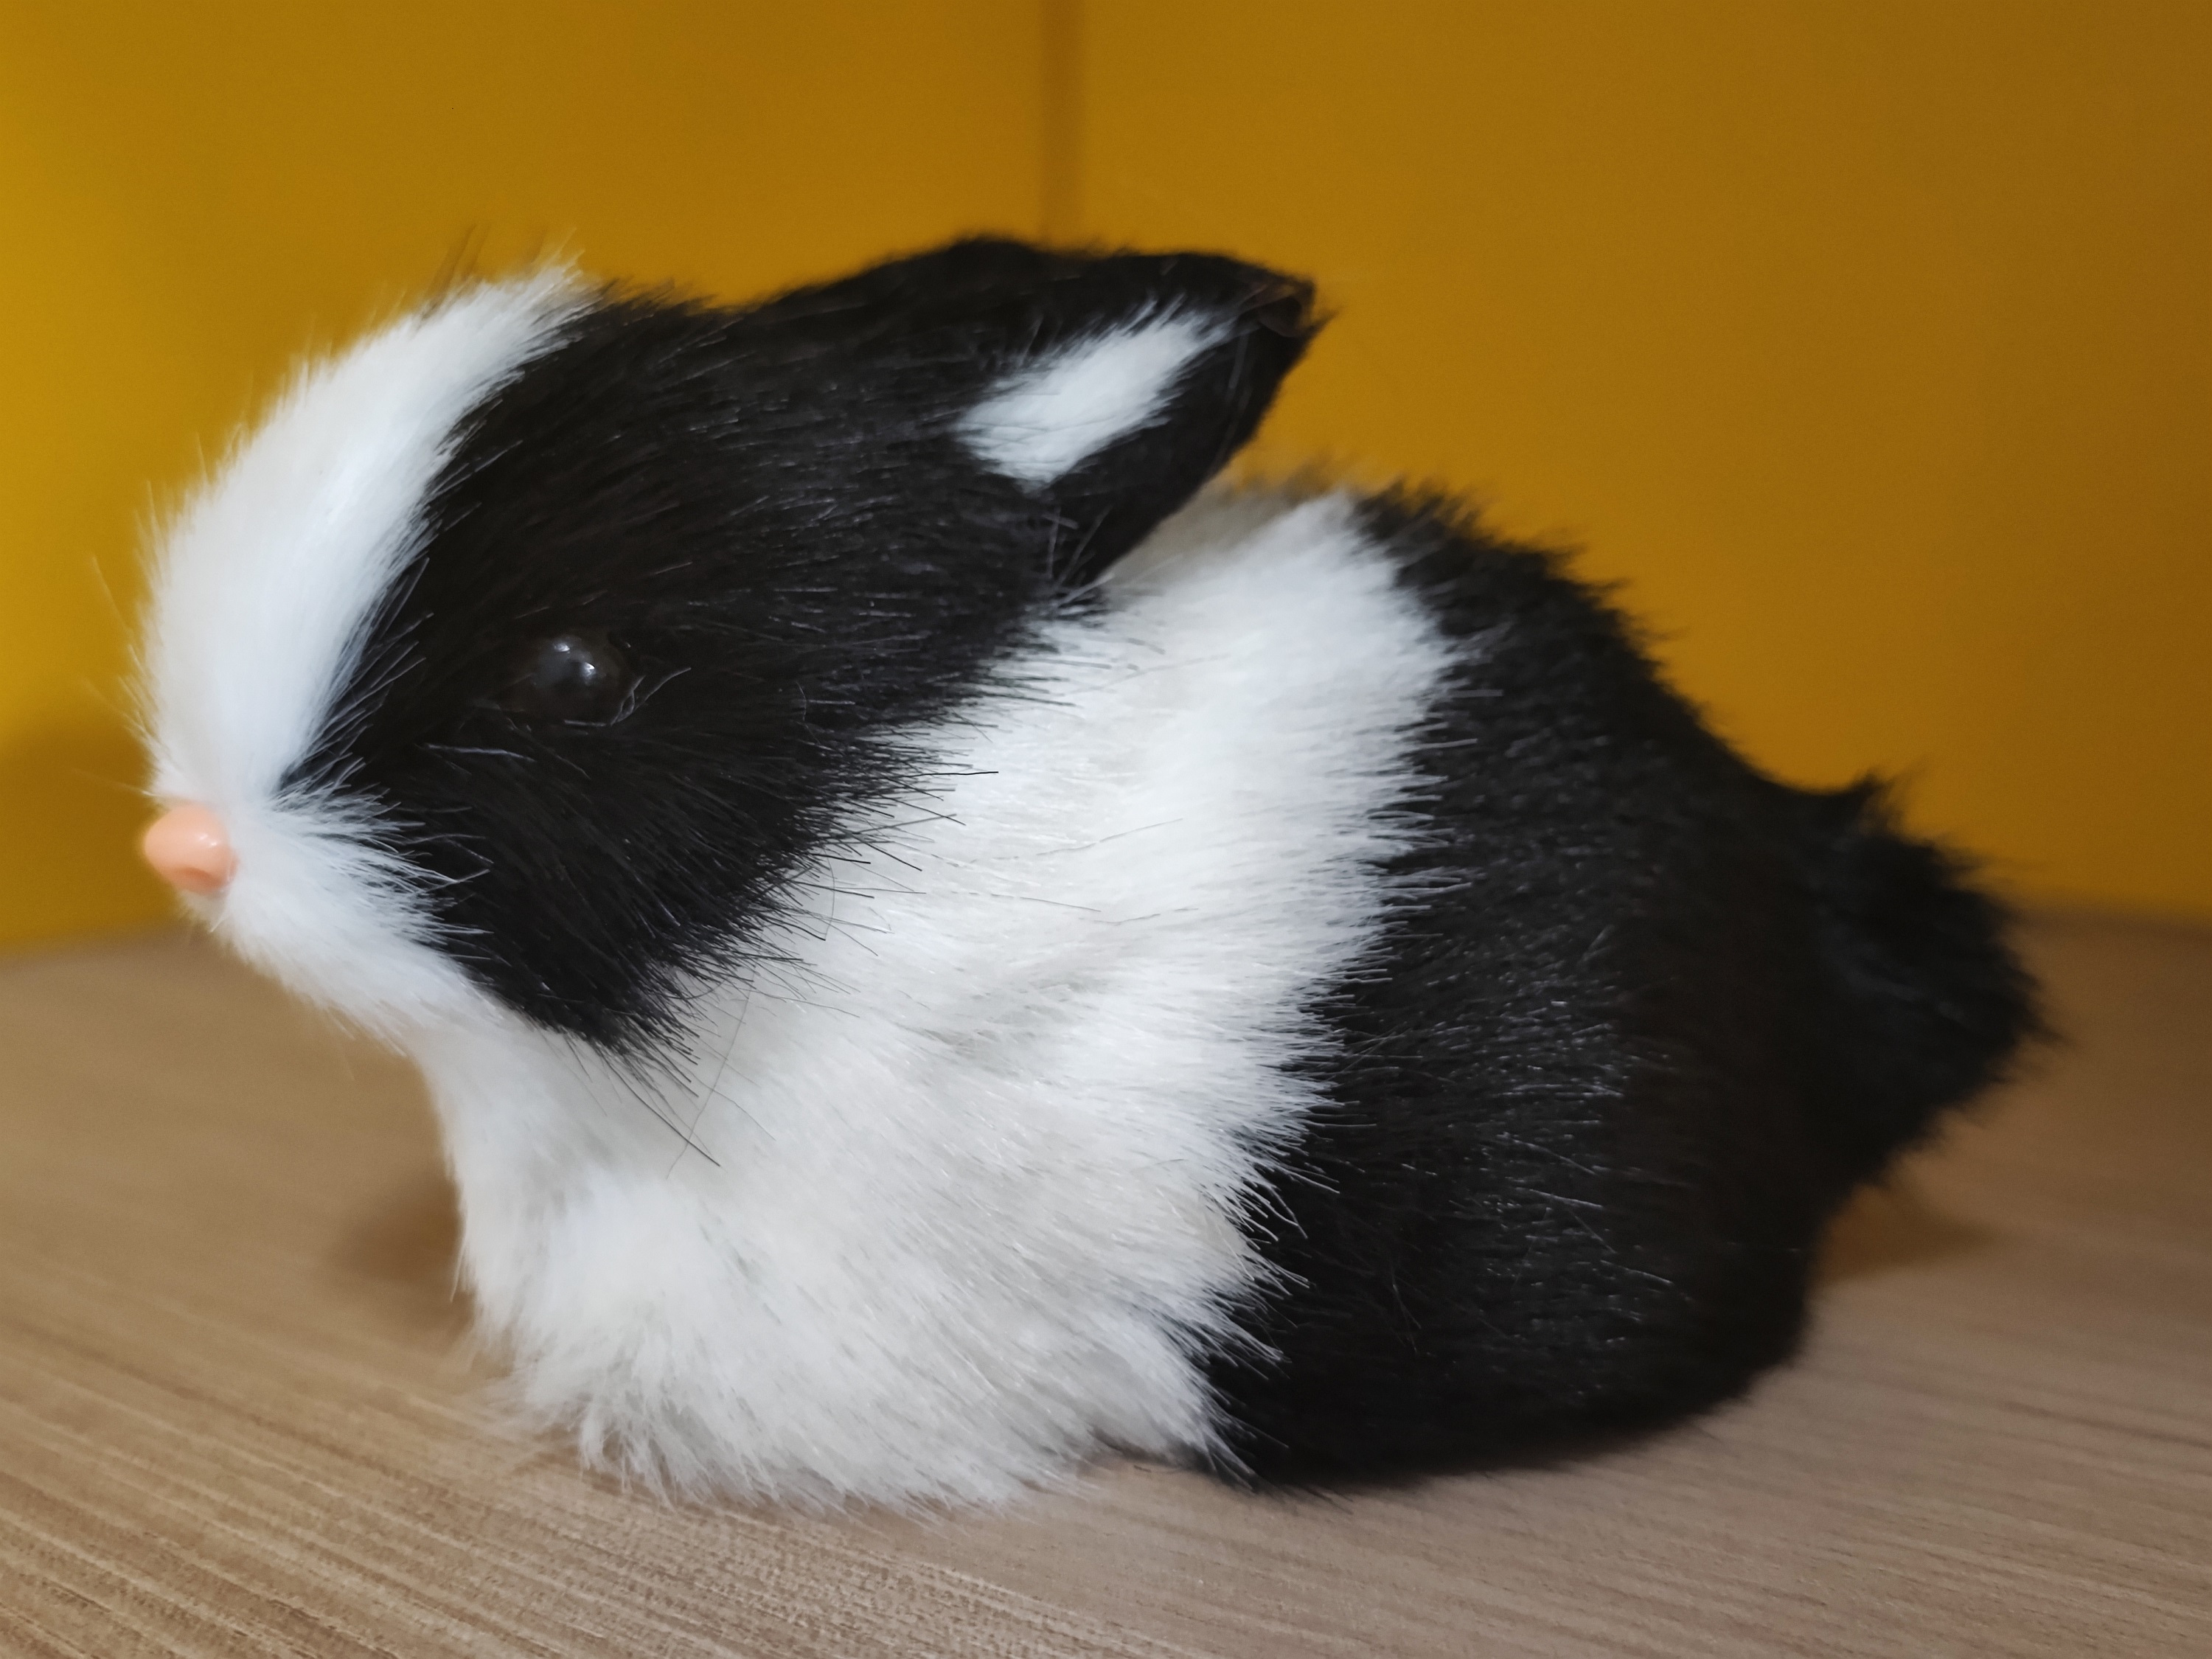 Peluche Lapin Holland Lop